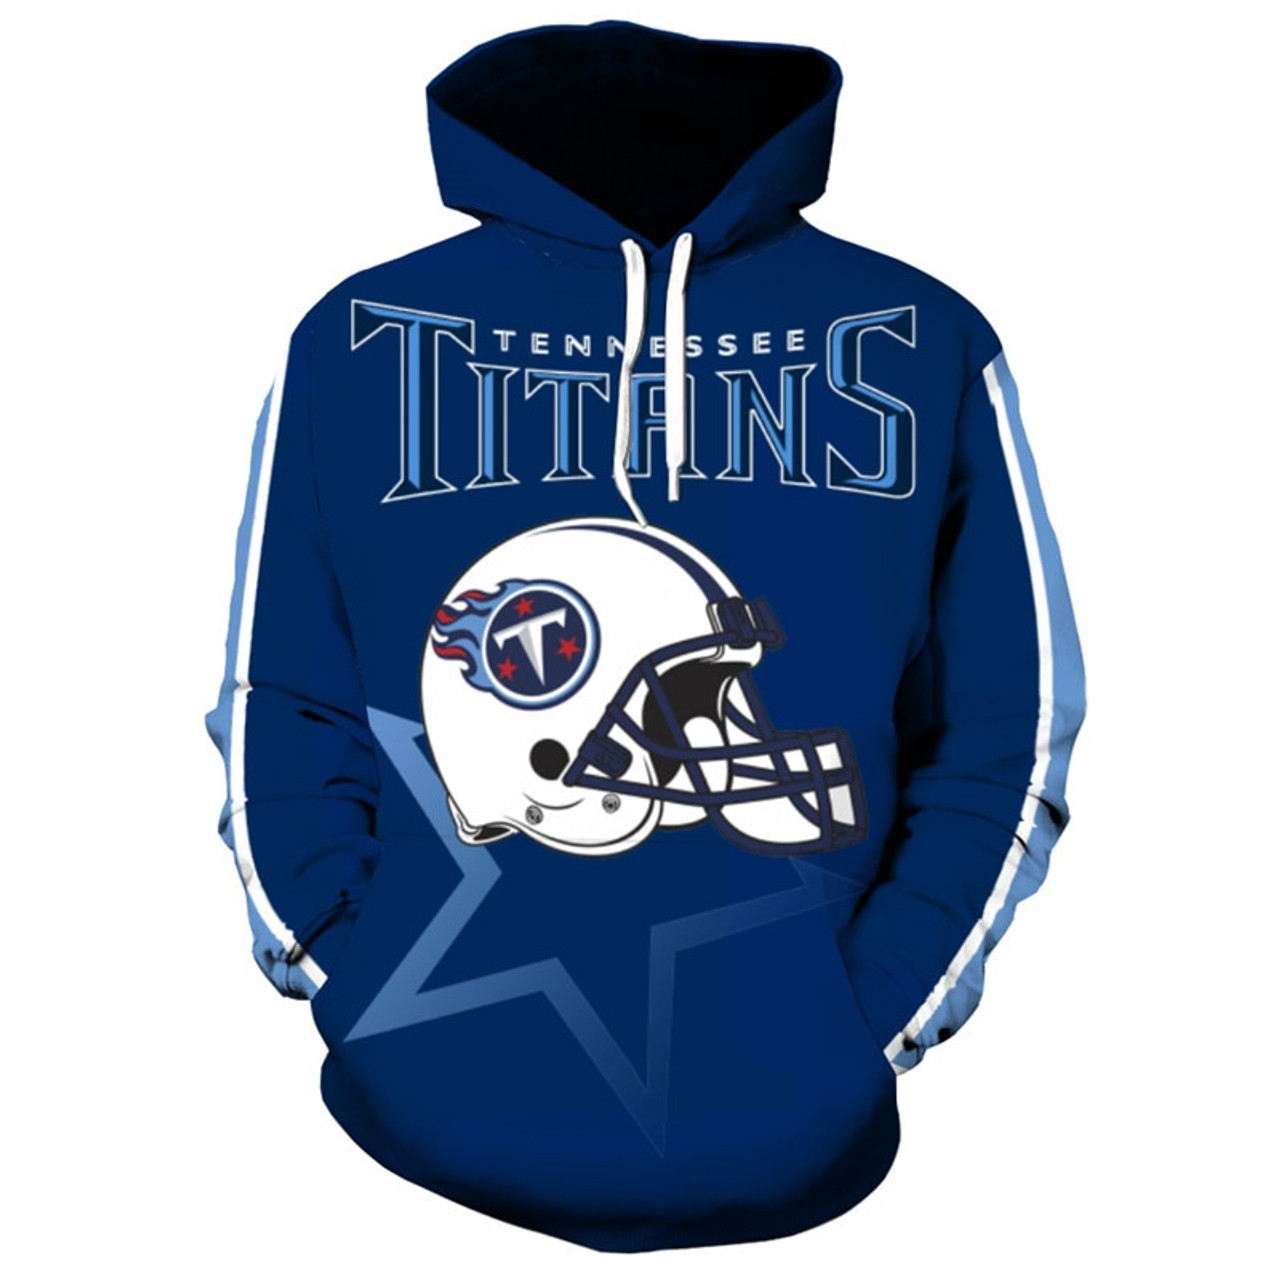 **(OFFICIALLY-LICENSED-N.F.L.TENNESSEE-TITANS-TRENDY-PULLOVER-TEAM-HOODIES/NICE-CUSTOM-3D-EFFECT-GRAPHIC-PRINTED-DOUBLE-SIDED-ALL-OVER-OFFICIAL-TITANS-LOGOS & IN-OFFICIAL-TITANS-TEAM-COLORS/WARM-PREMIUM-OFFICIAL-TEAM-PULLOVER-POCKET-HOODIES)**